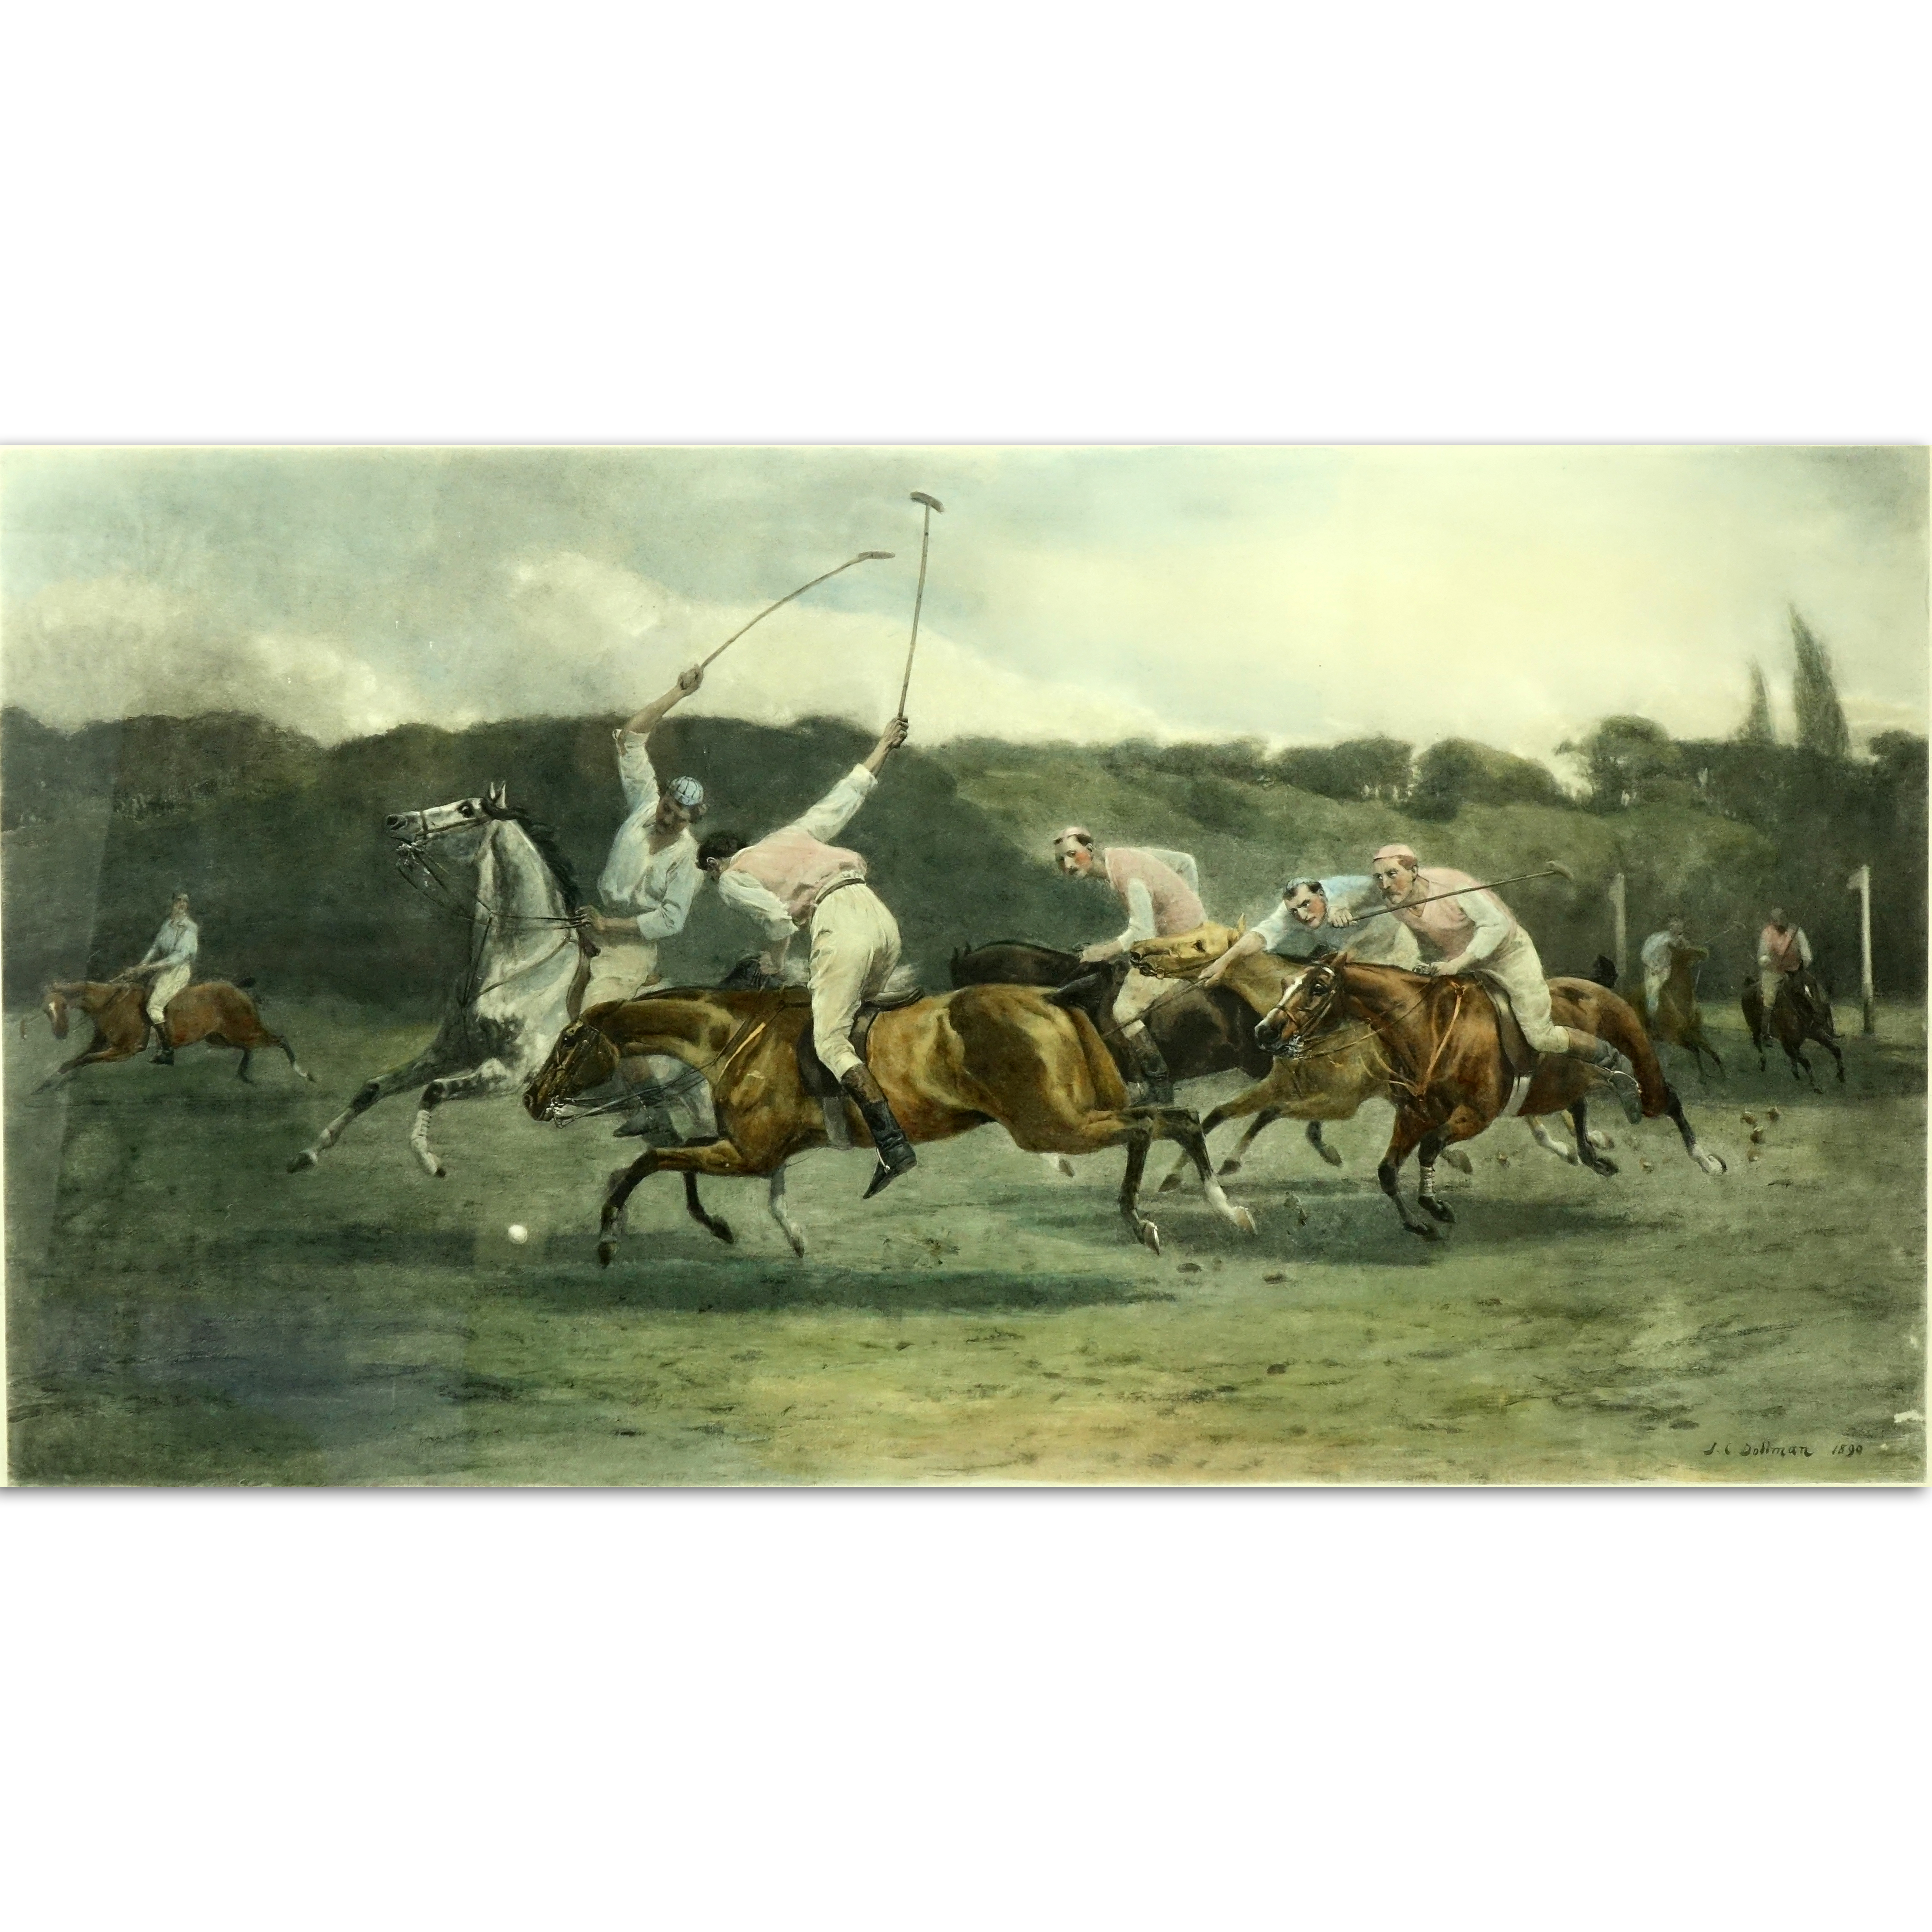 J.C. Dollman, British (1851-1934) "Polo" Color Engraving on Paper.